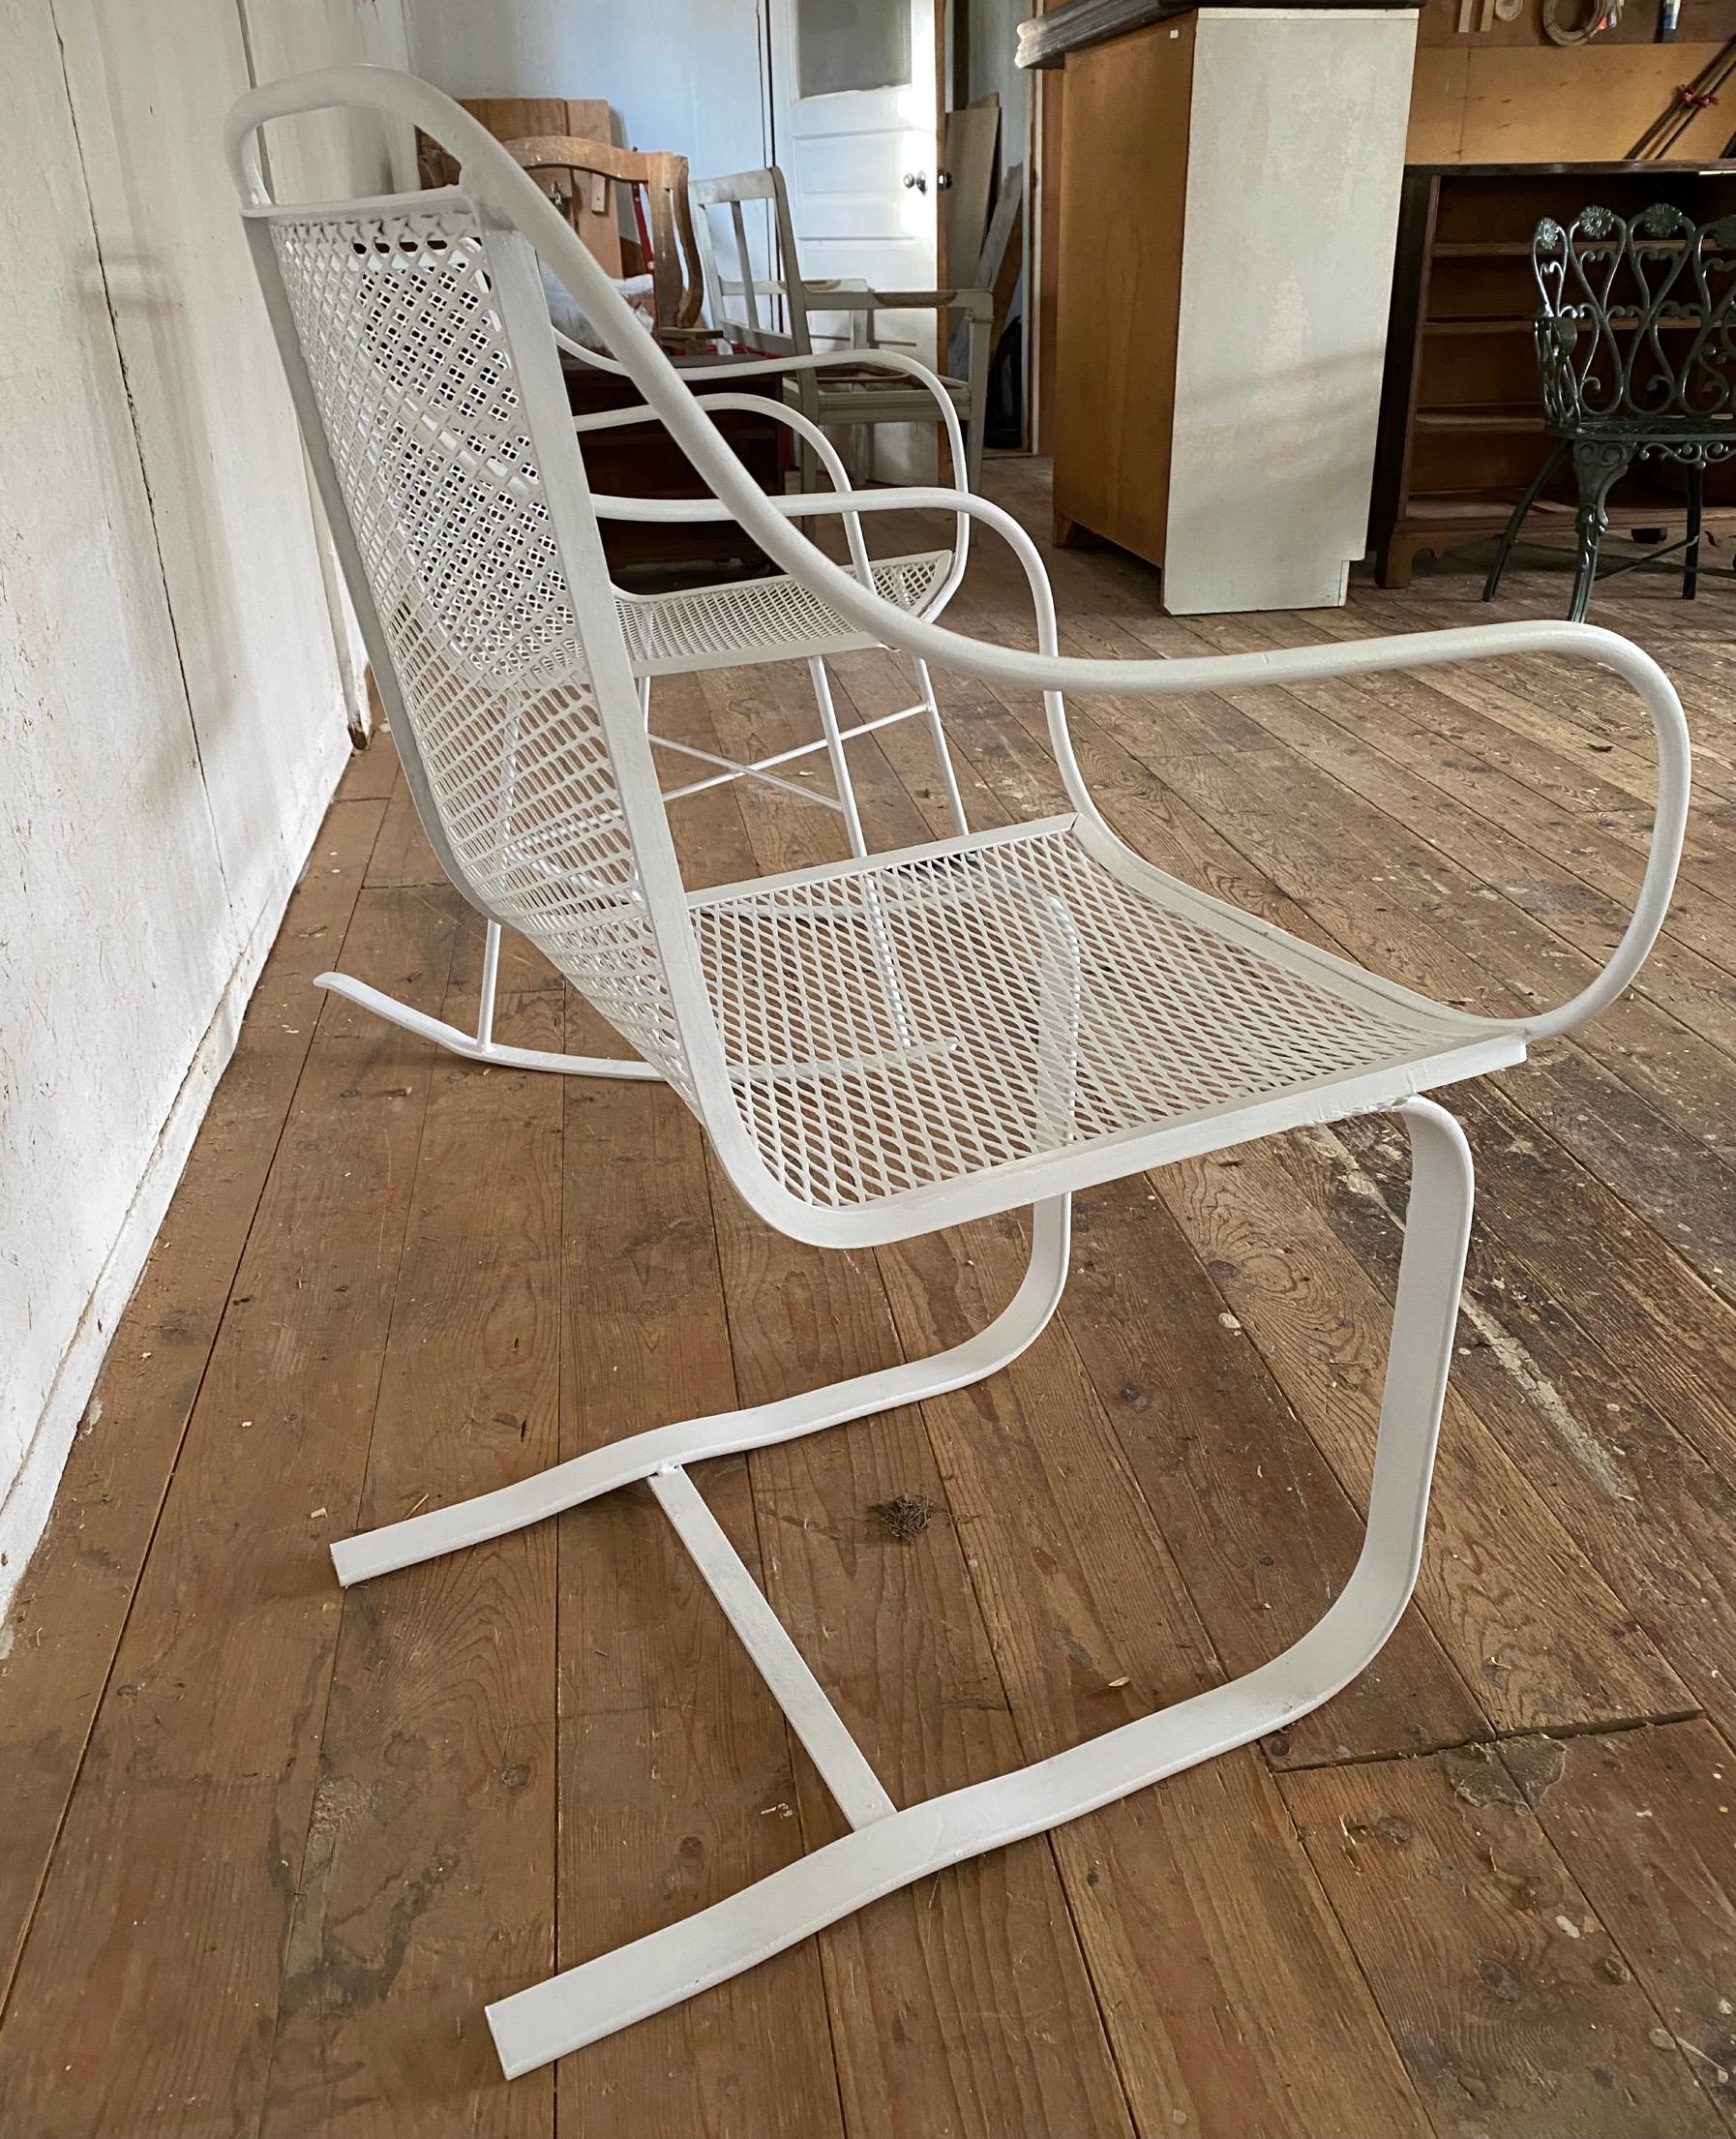 A rare pair of complementary mesh and flat steel springer and rocking chair for indoor, outdoor, garden, porch or patio use. Wonderful design, springy mesh seat and back for comfort and relaxation on that summer day. Chairs have generous